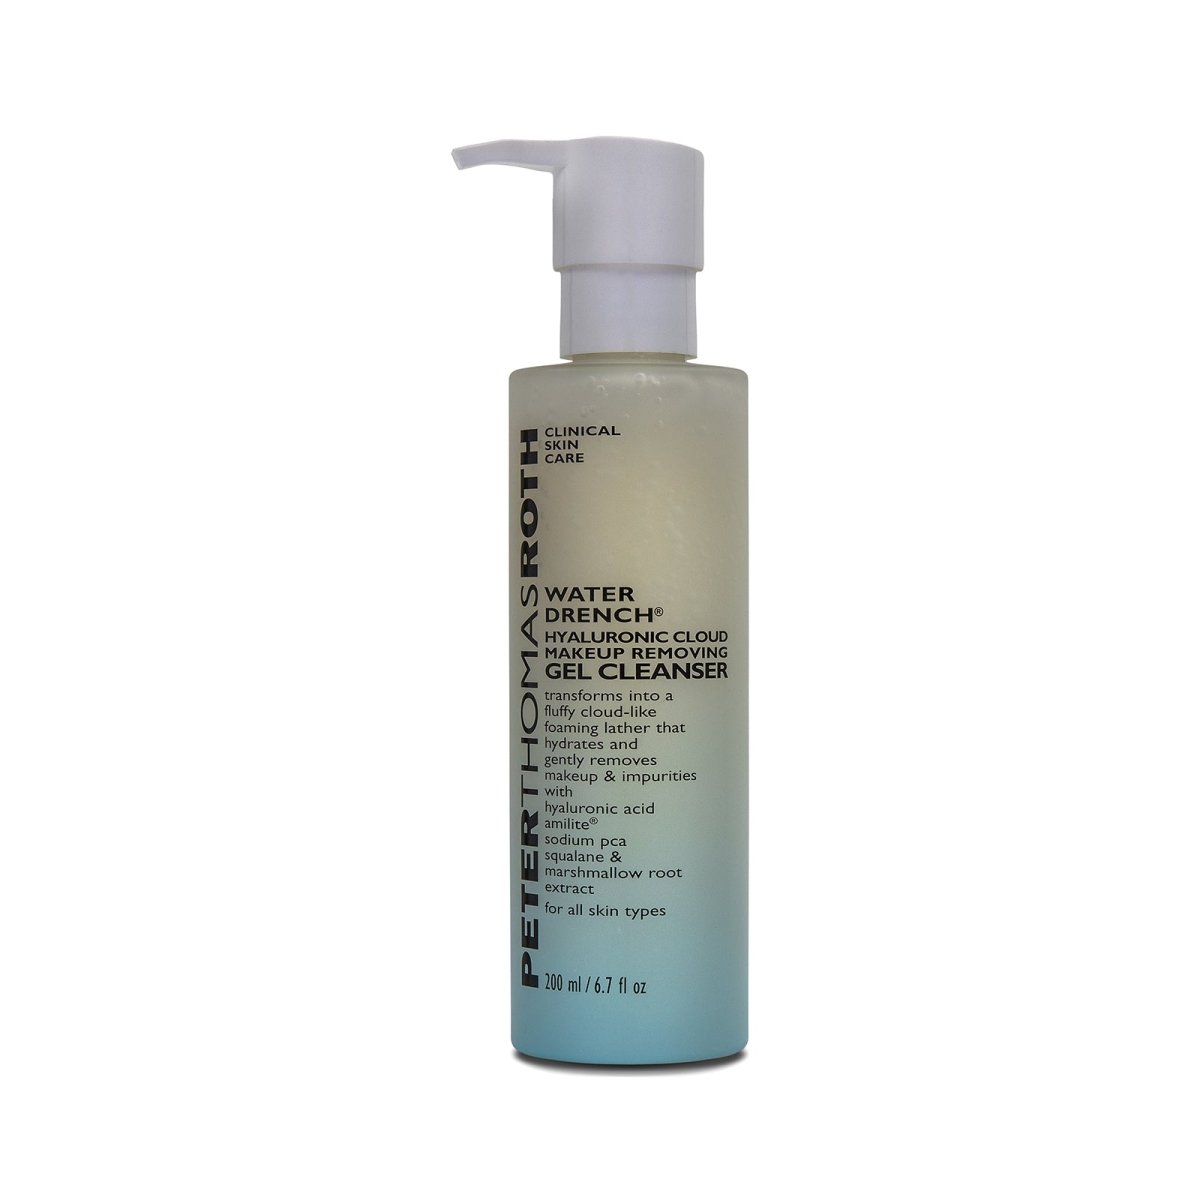 Peter Thomas Roth Water Drench® Hyaluronic Cloud Makeup Removing Gel Cleanser - SkincareEssentials